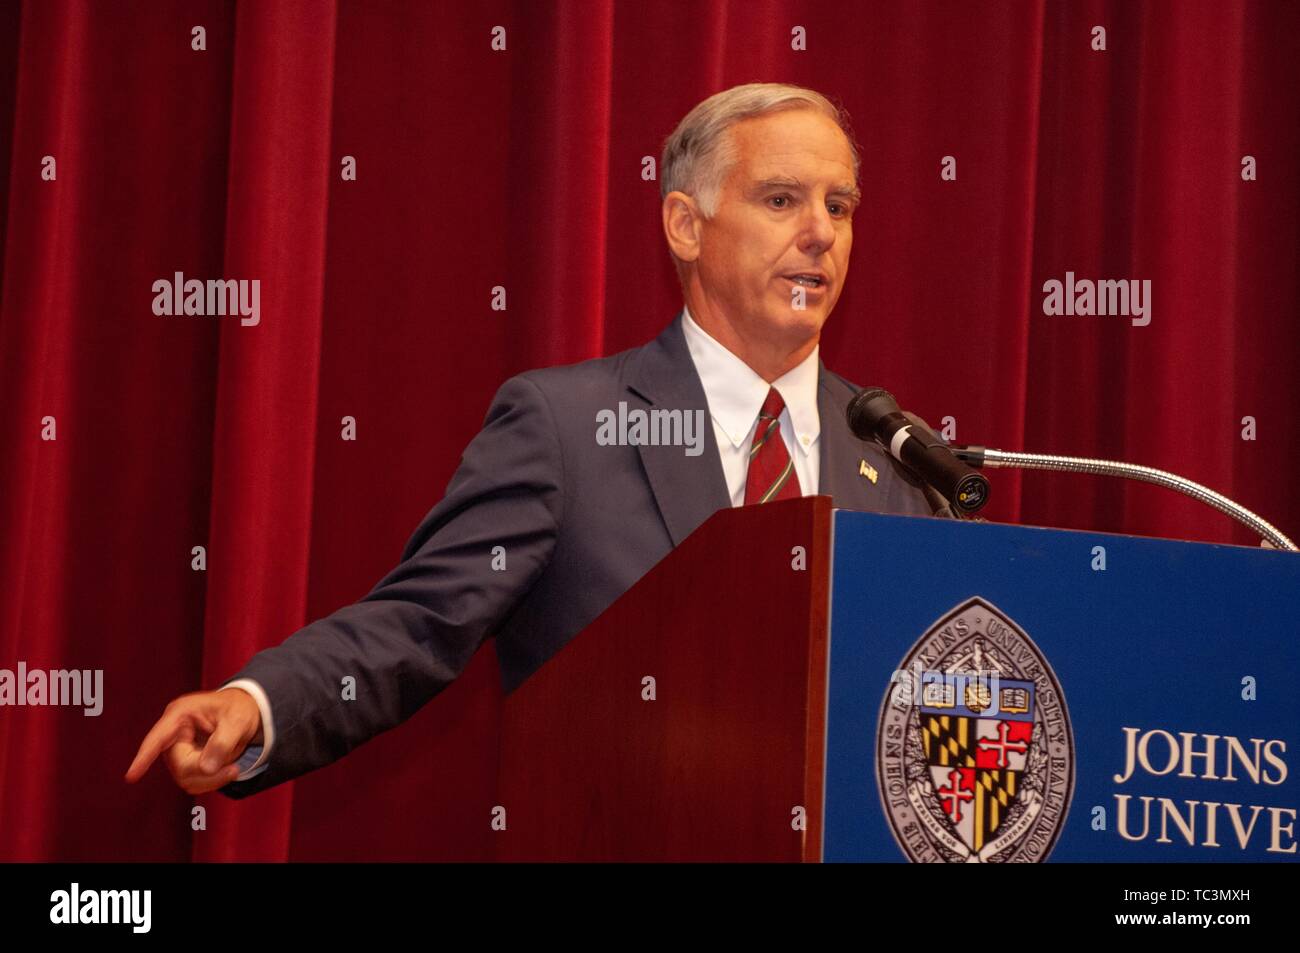 American politician Howard Dean speaks at a podium at the Johns Hopkins University, Baltimore, Maryland, October 11, 2007. From the Homewood Photography collection. () Stock Photo